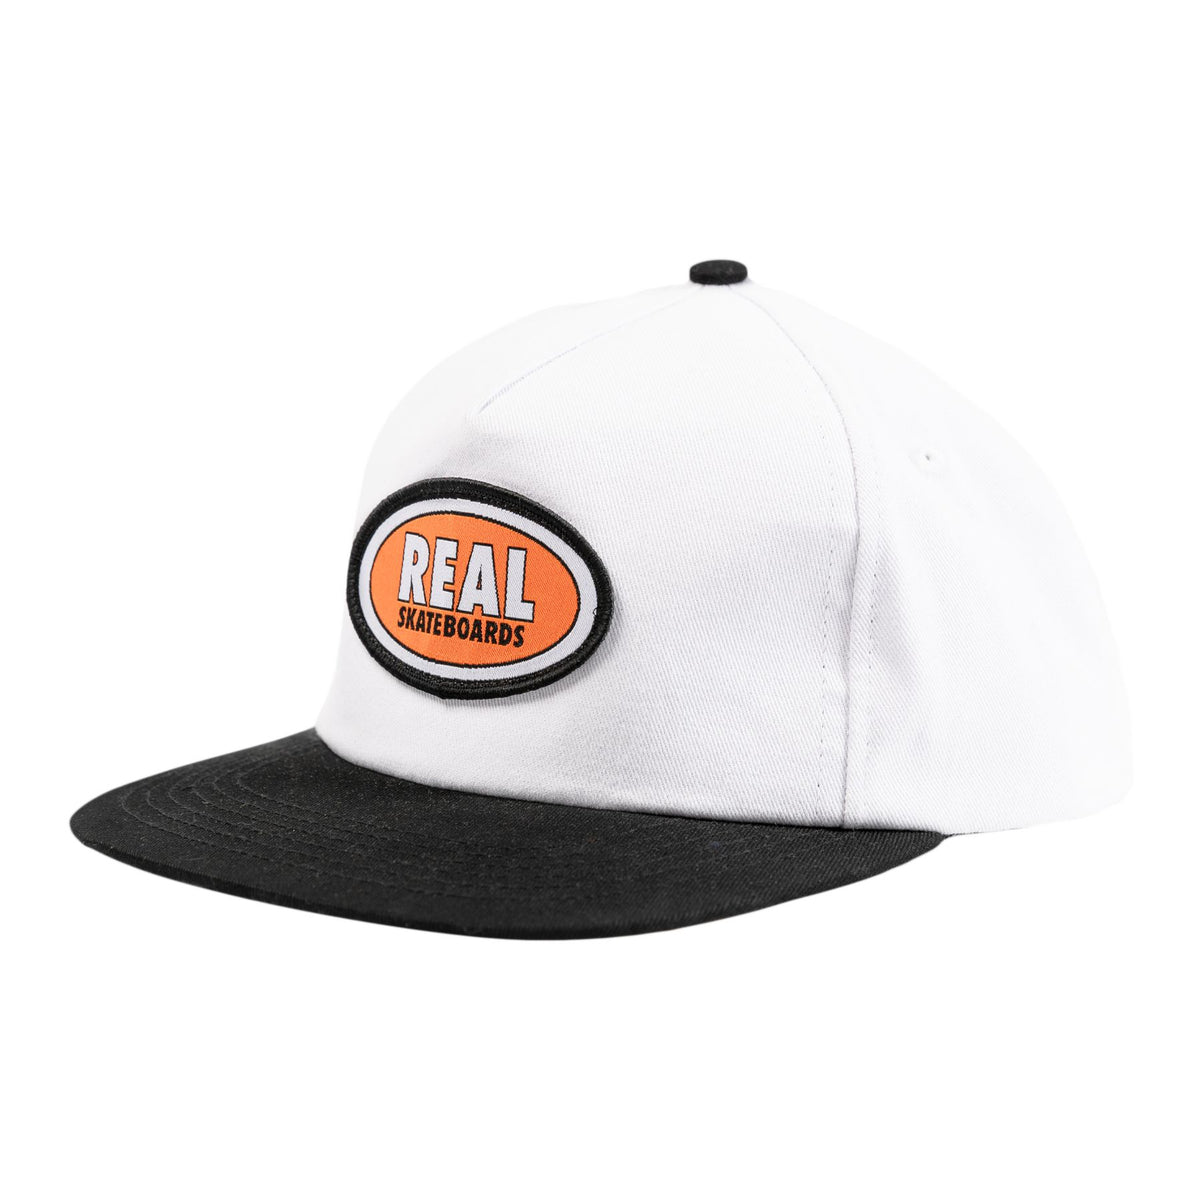 Real Oval Snapback - White/Red/Black